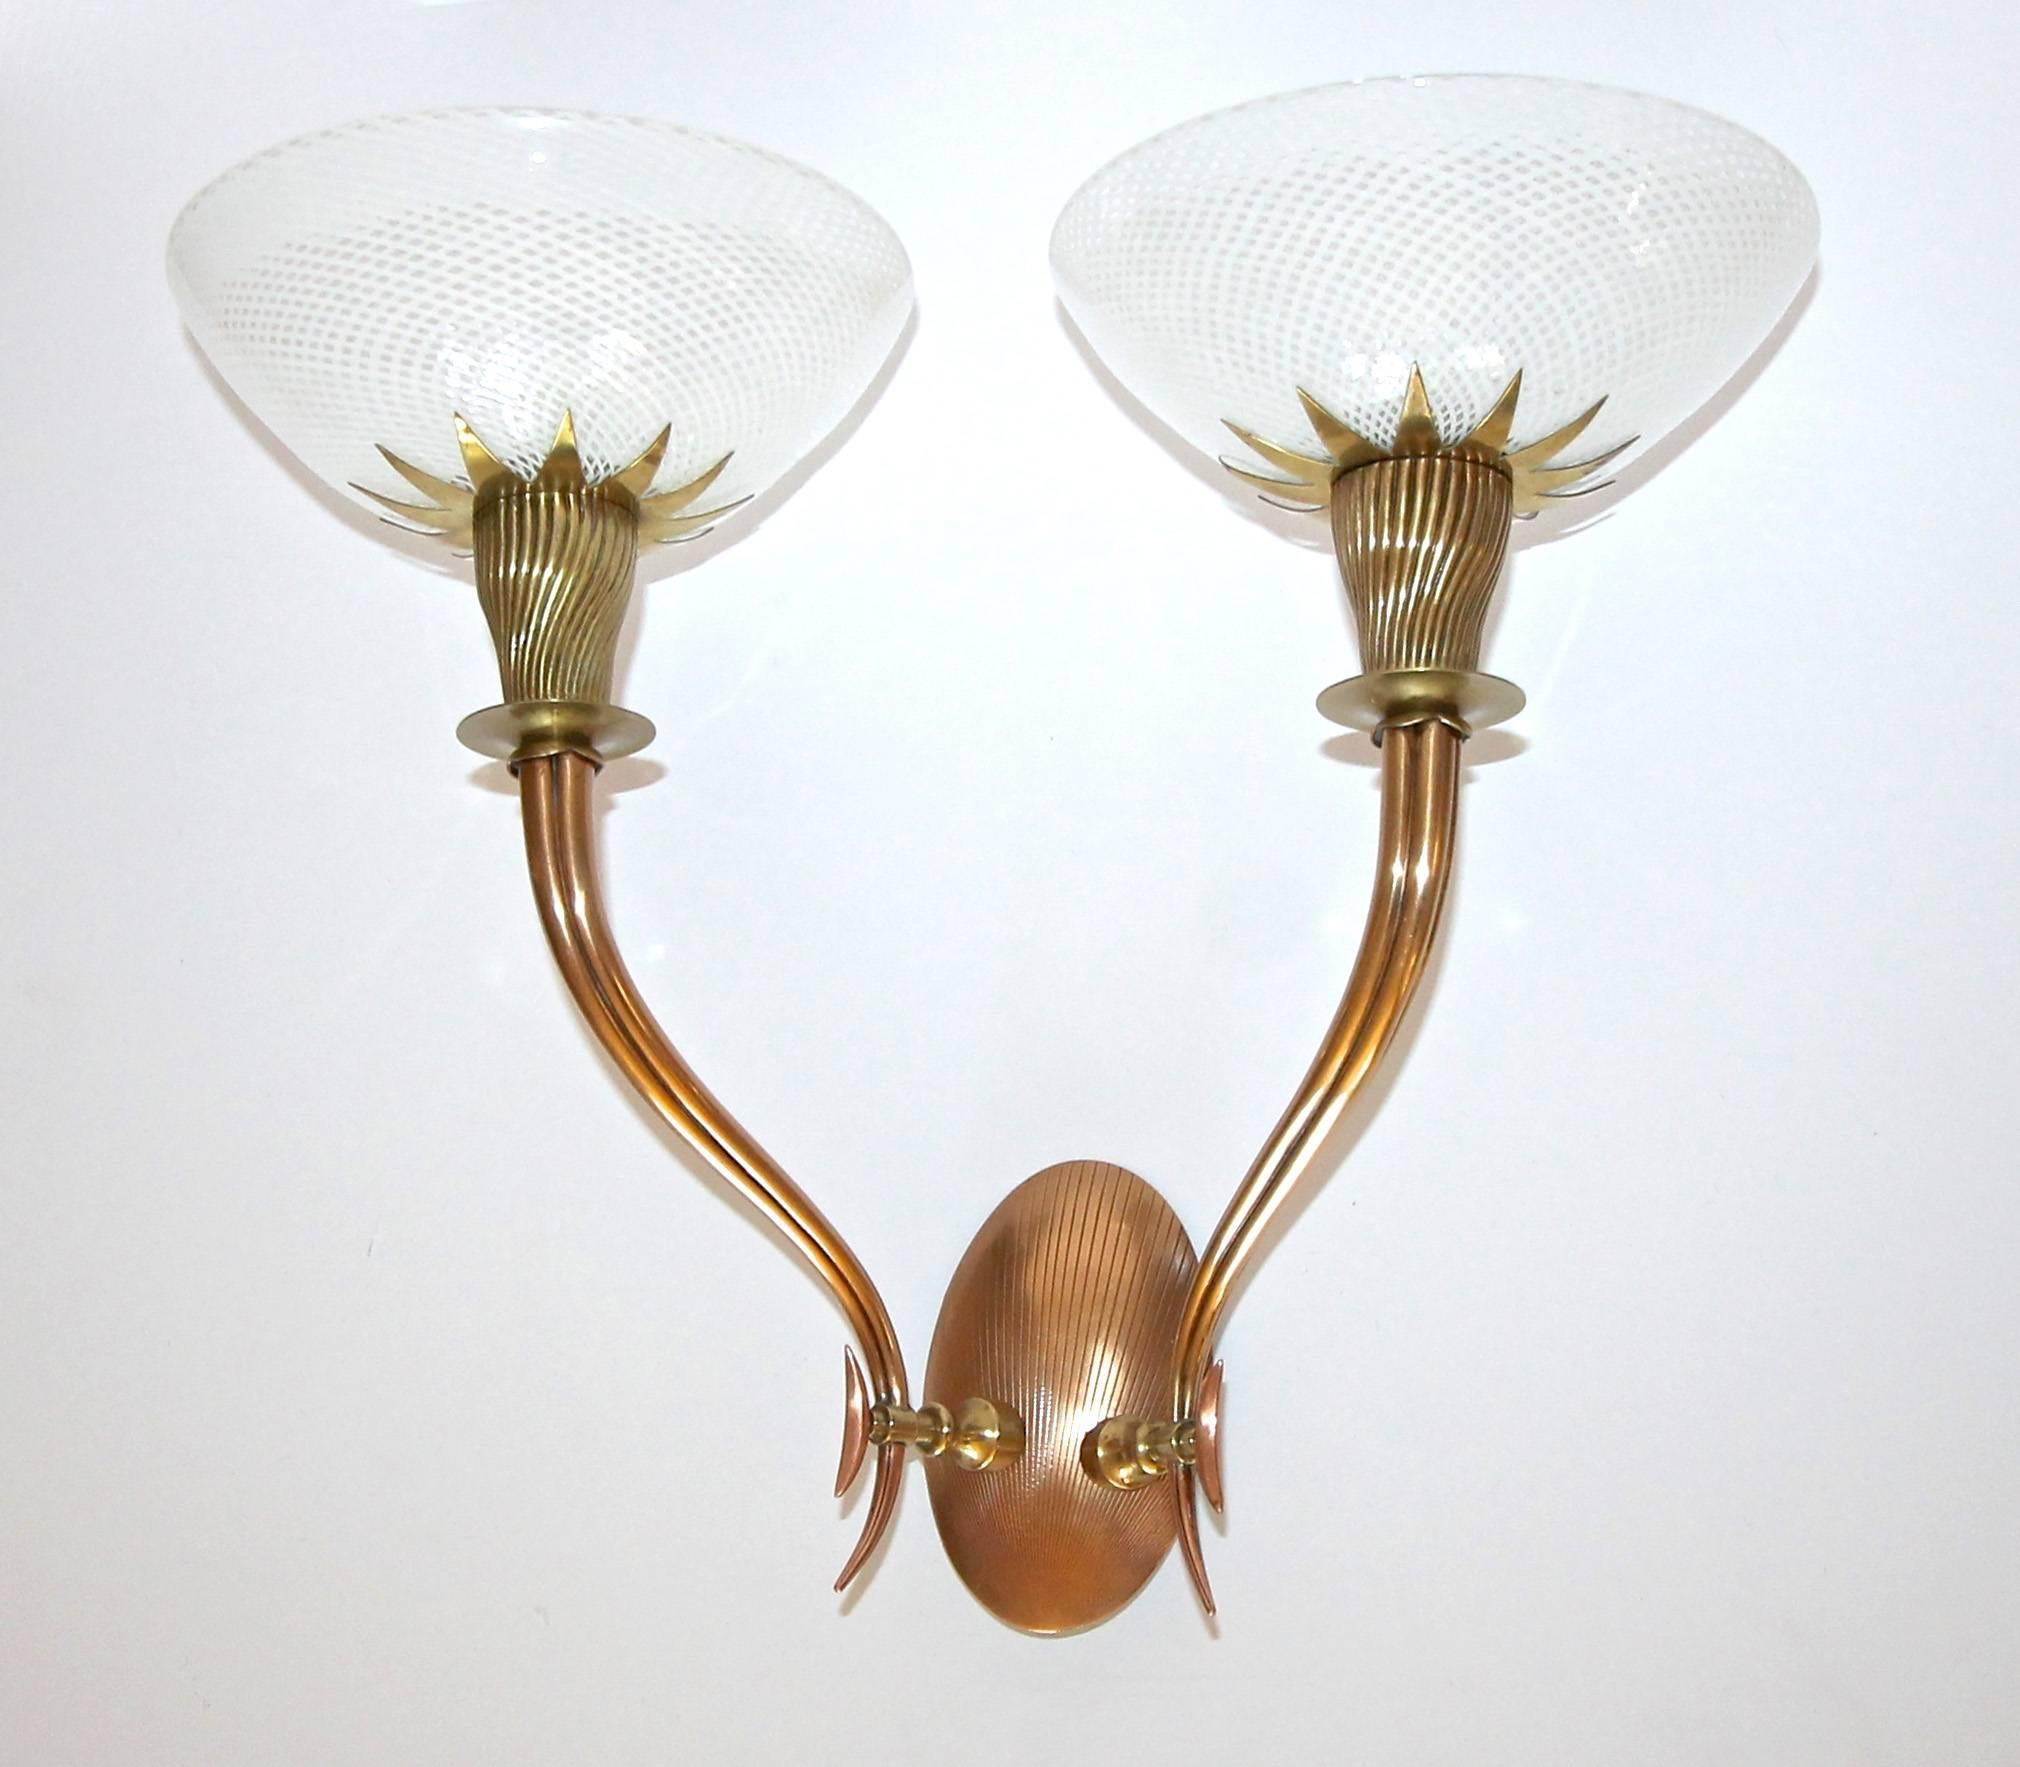 Exceptional pair of Italian Art Deco wall sconces alternating in brass and copper with beautifully scrolled arms and exquisite mezza filigrana white caned glass shades by Venini. Newly wired. Each sconce uses 2 - 40 watt max candelabra base bulbs.